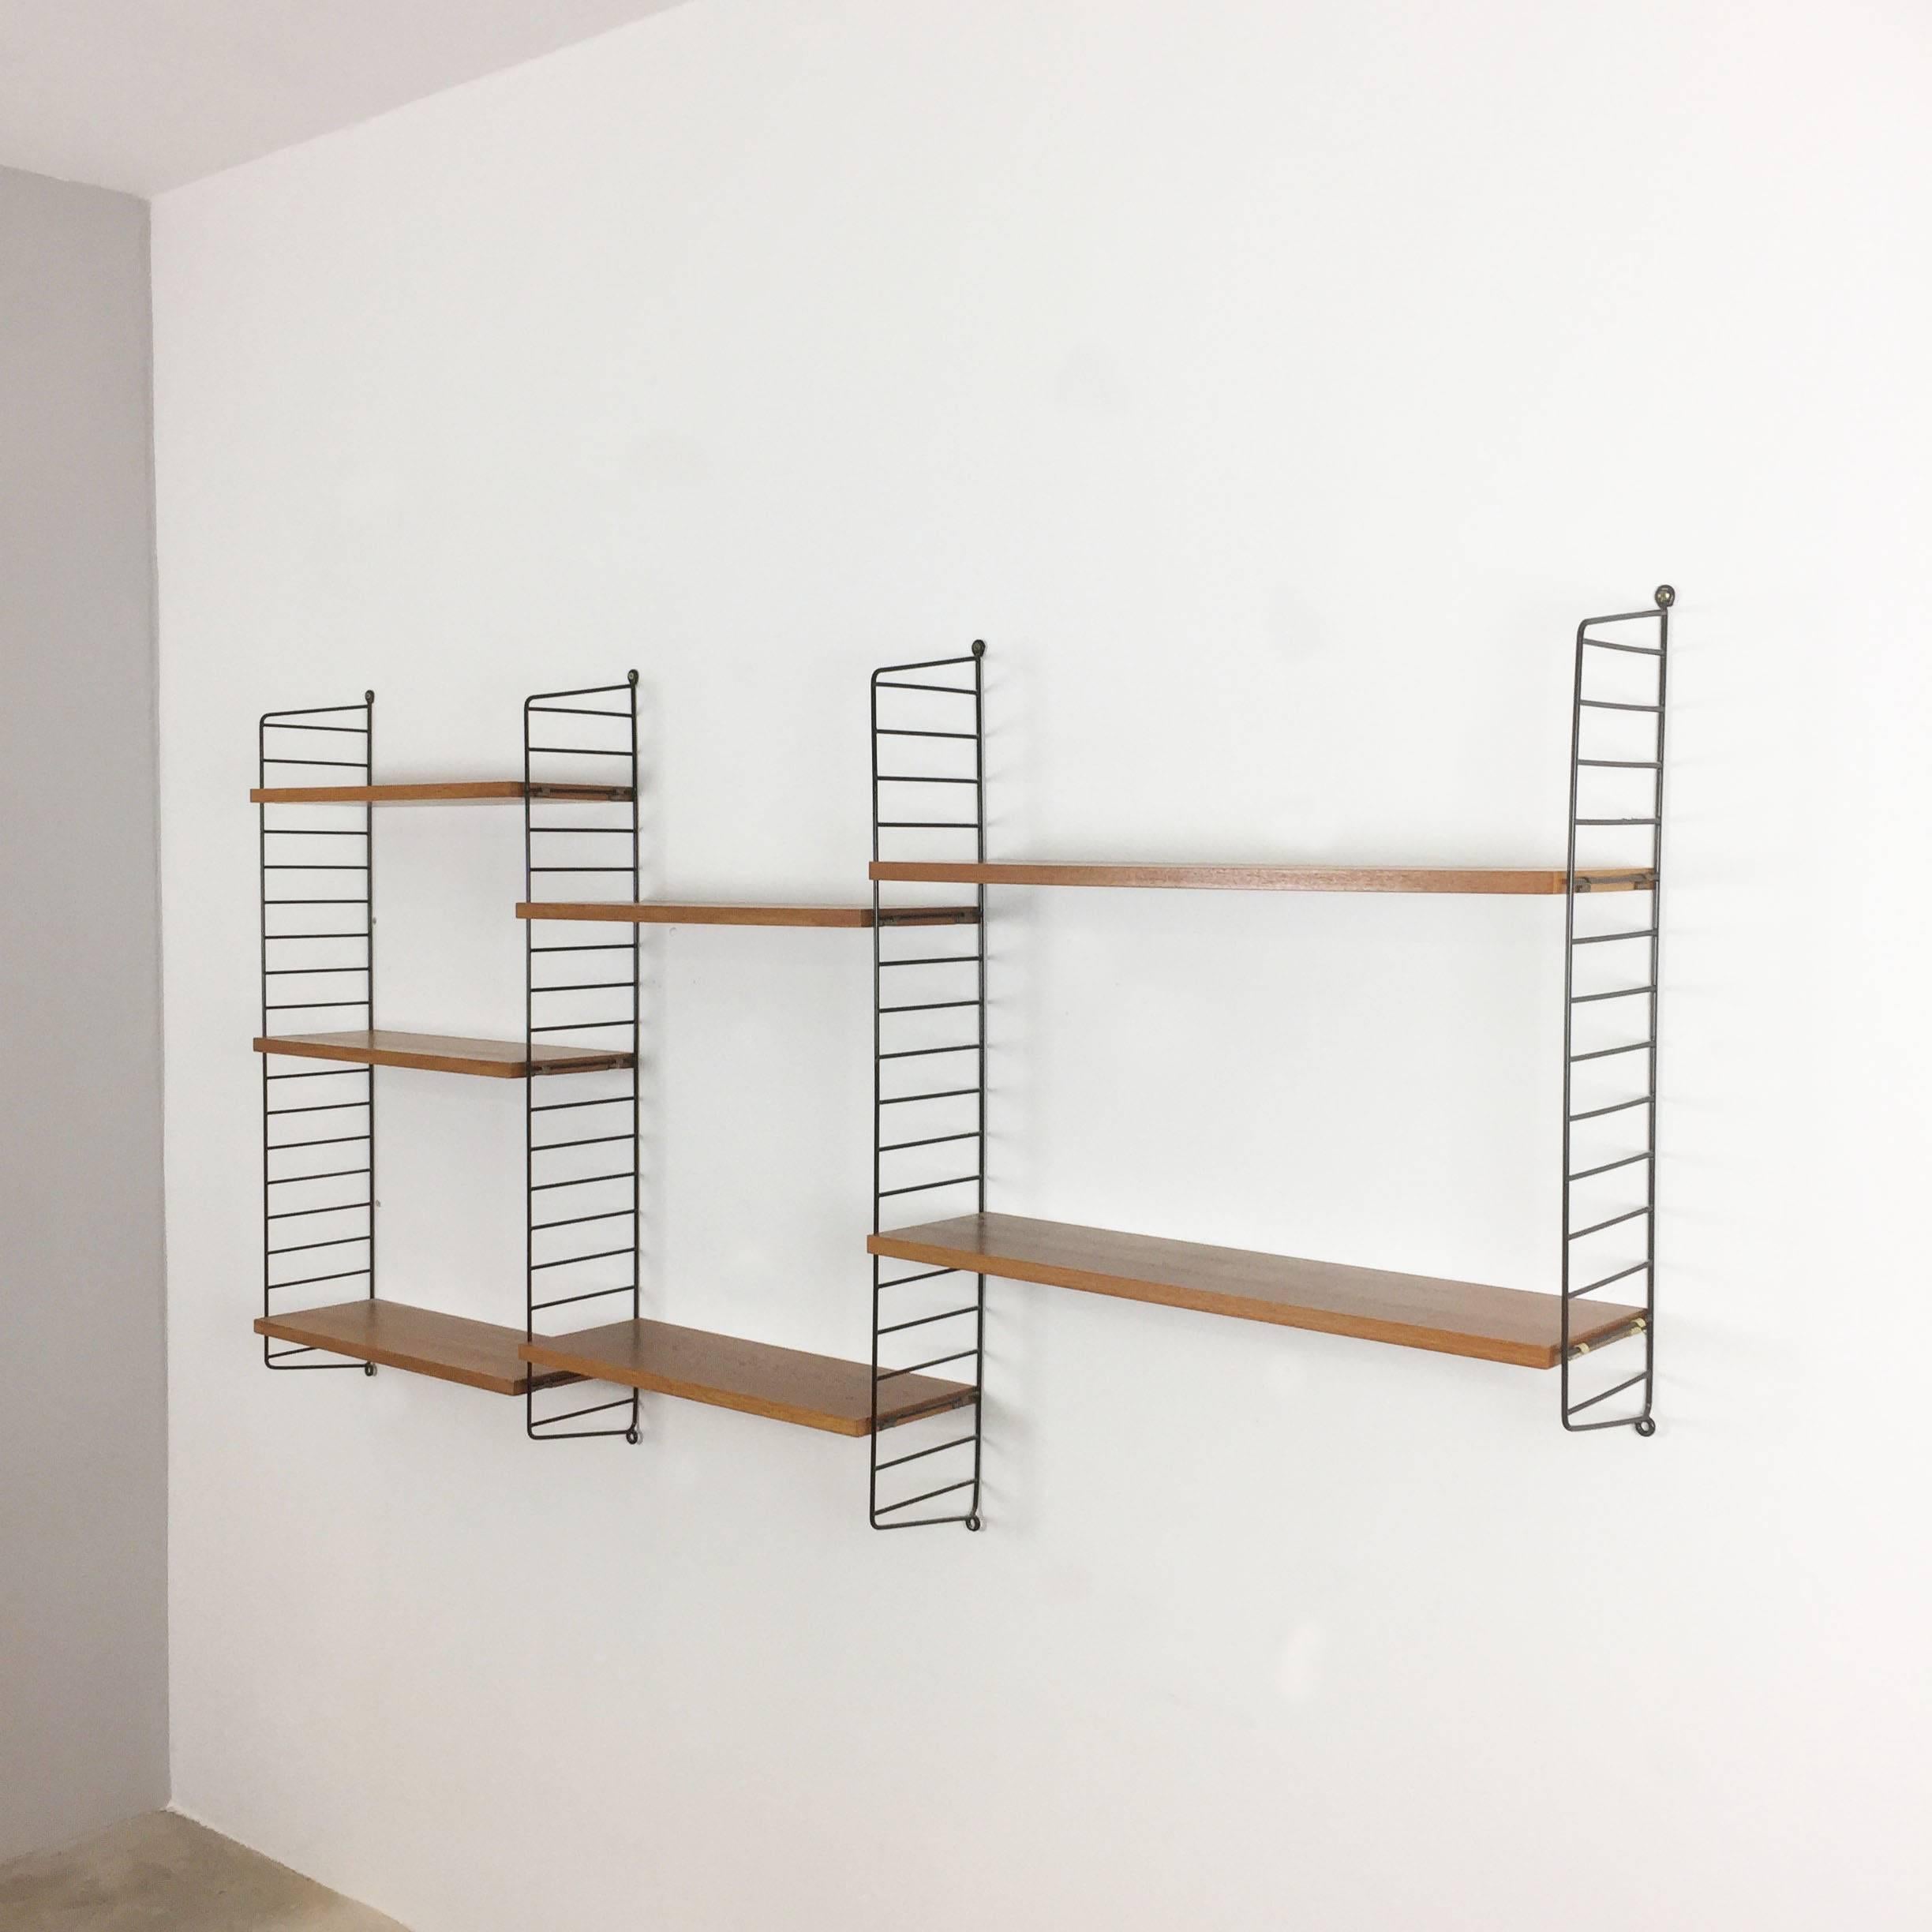 String Regal wall unit

Made in Sweden

Bokhyllan ’The Ladder Shelf’

Design: Nils und Kajsa Strinning, 1949

The architect Nisse Strinning was born in 1917. From 1940 to 1947 he studied architecture in Stockholm, before he designed the